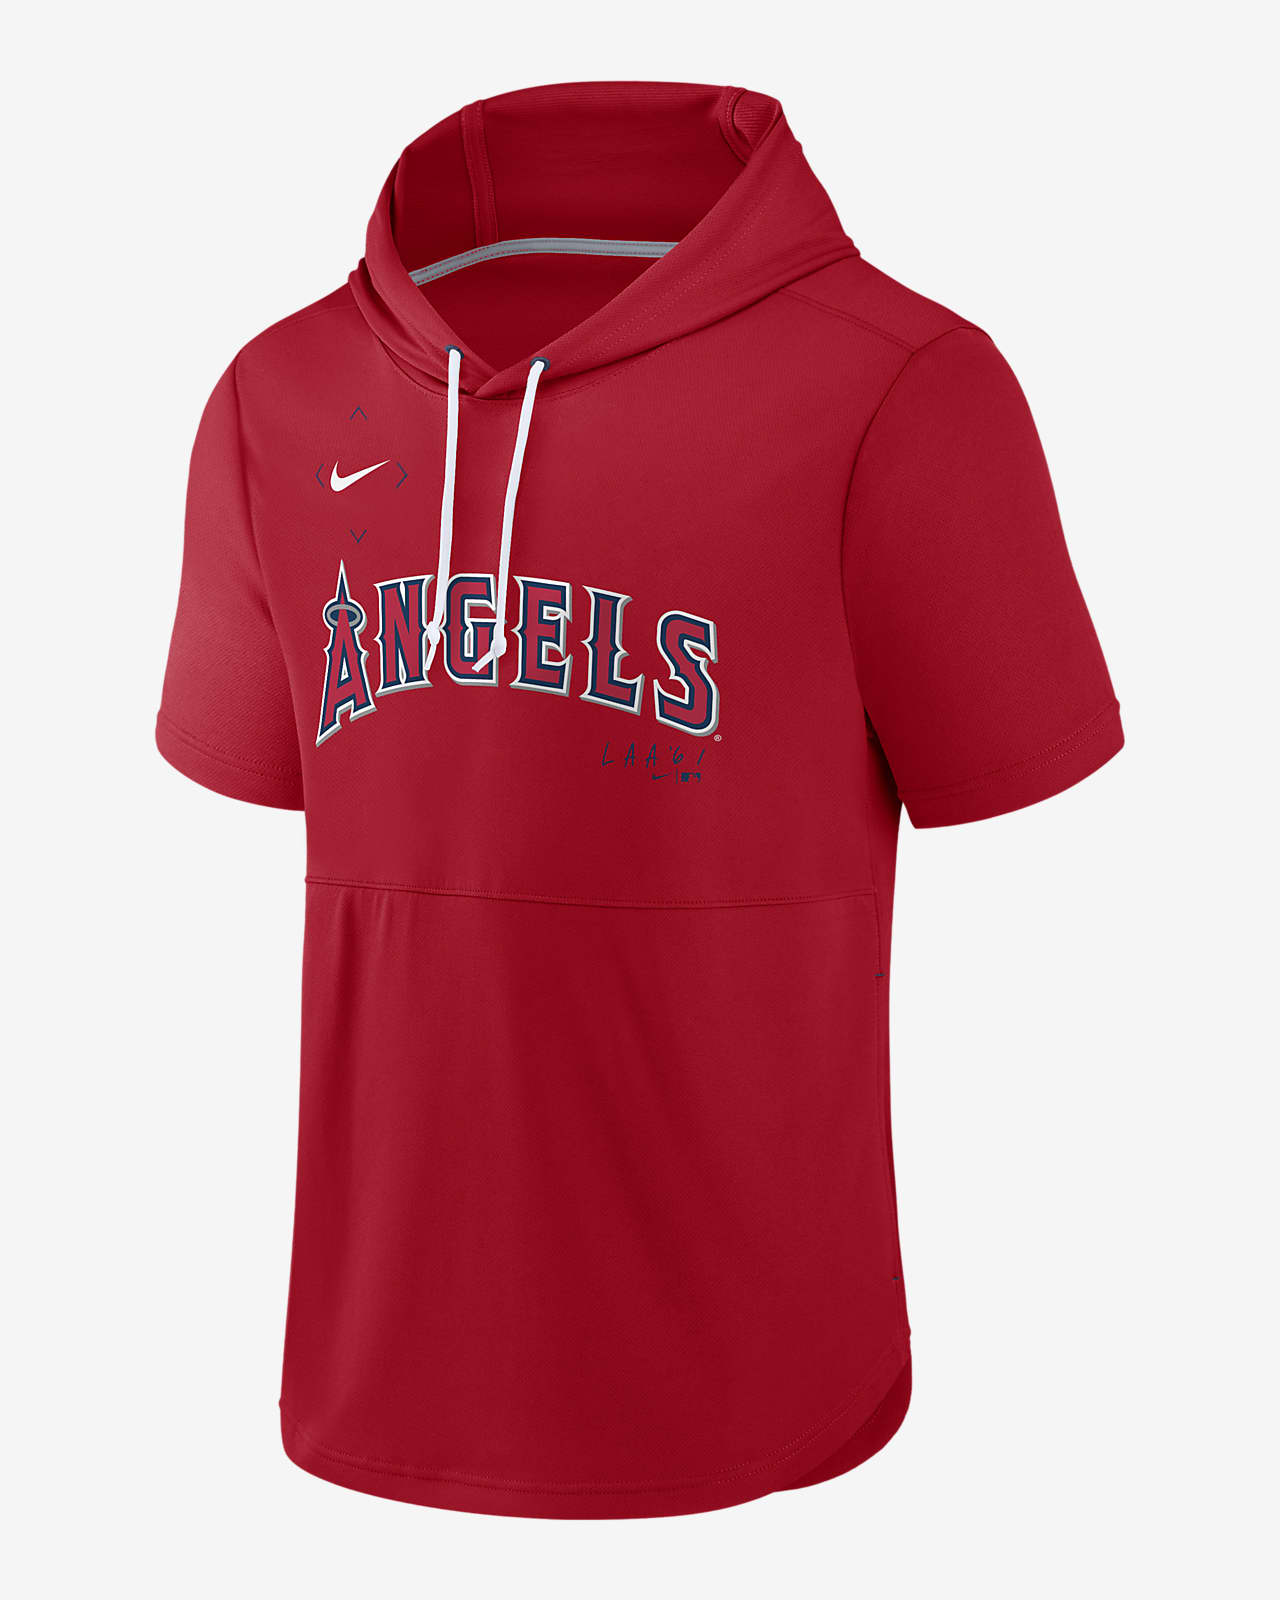 https://static.nike.com/a/images/t_PDP_1280_v1/f_auto,q_auto:eco/9d53739d-d35a-4ef5-a4dd-4cb5a7183bfc/springer-los-angeles-angels-mens-short-sleeve-pullover-hoodie-CLtZZB.png